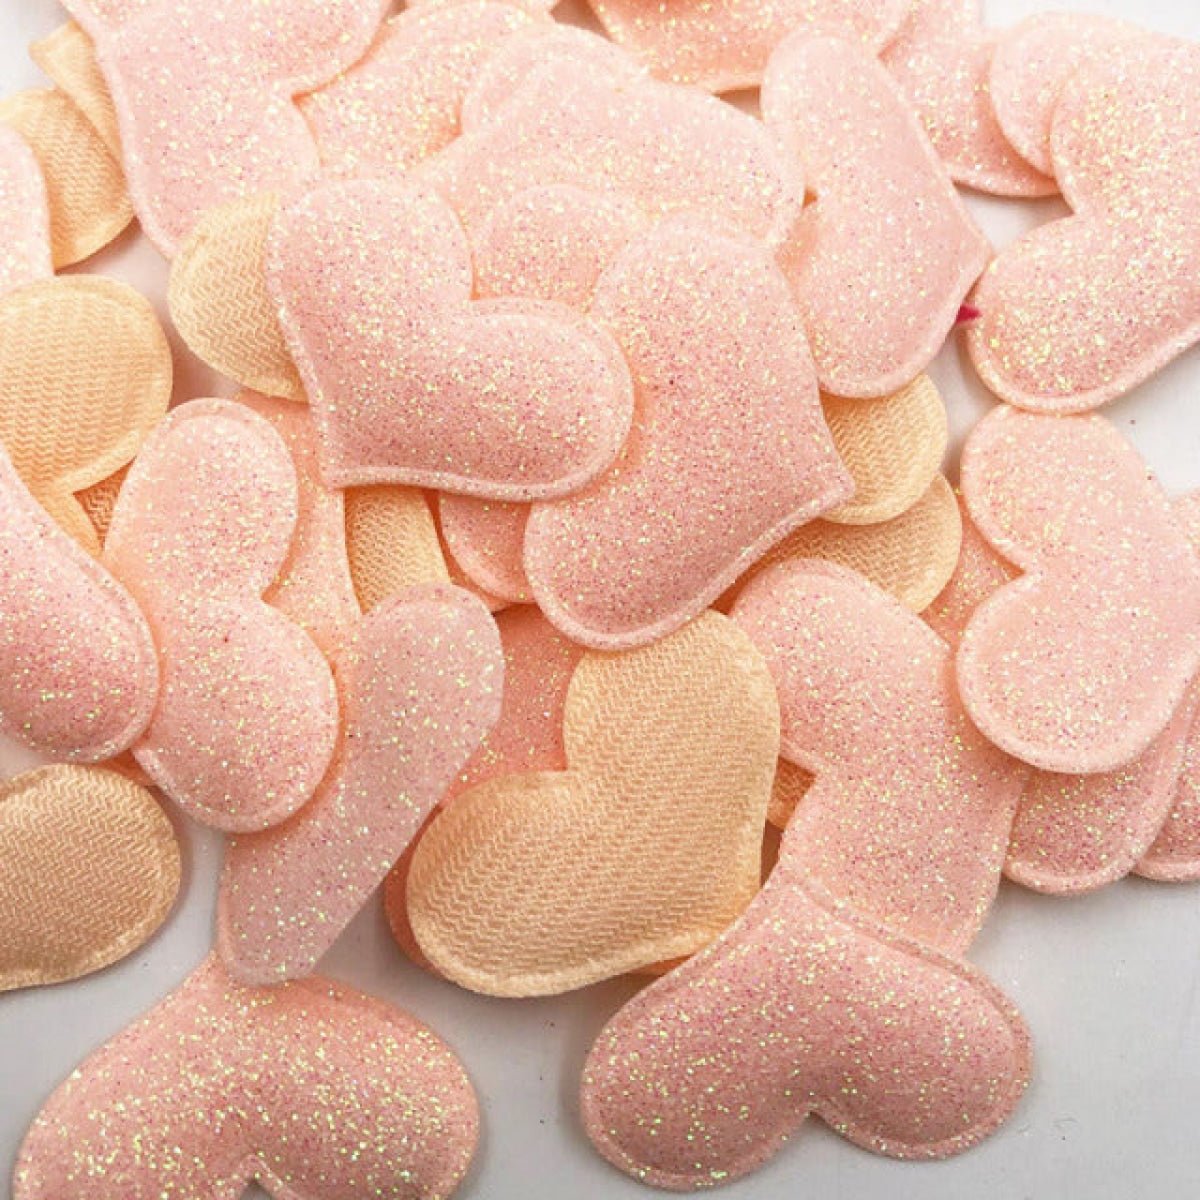 50pcs 35mmx30mm Glitter Padded Heart Felt Patches Appliques For Clothing Sewing DIY Wedding Decoration Toy Craft Shapes PU Leather - Peach - - Asia Sell